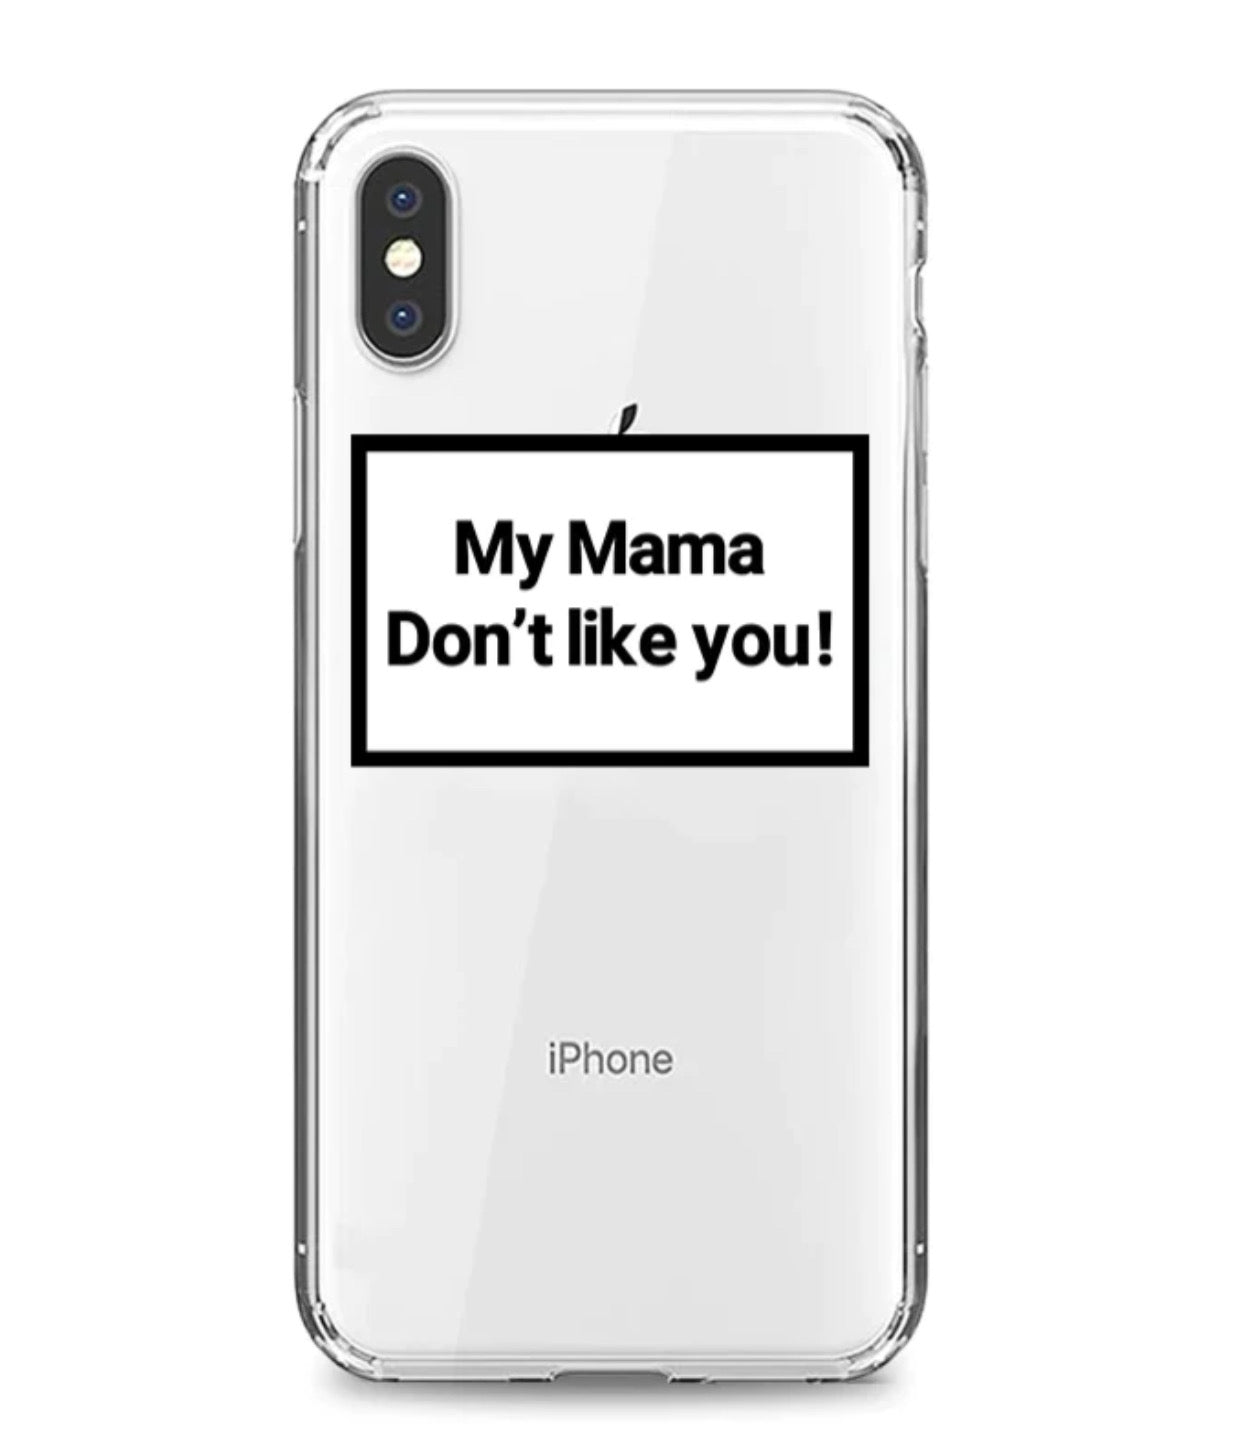 " my mama don't like you! " case